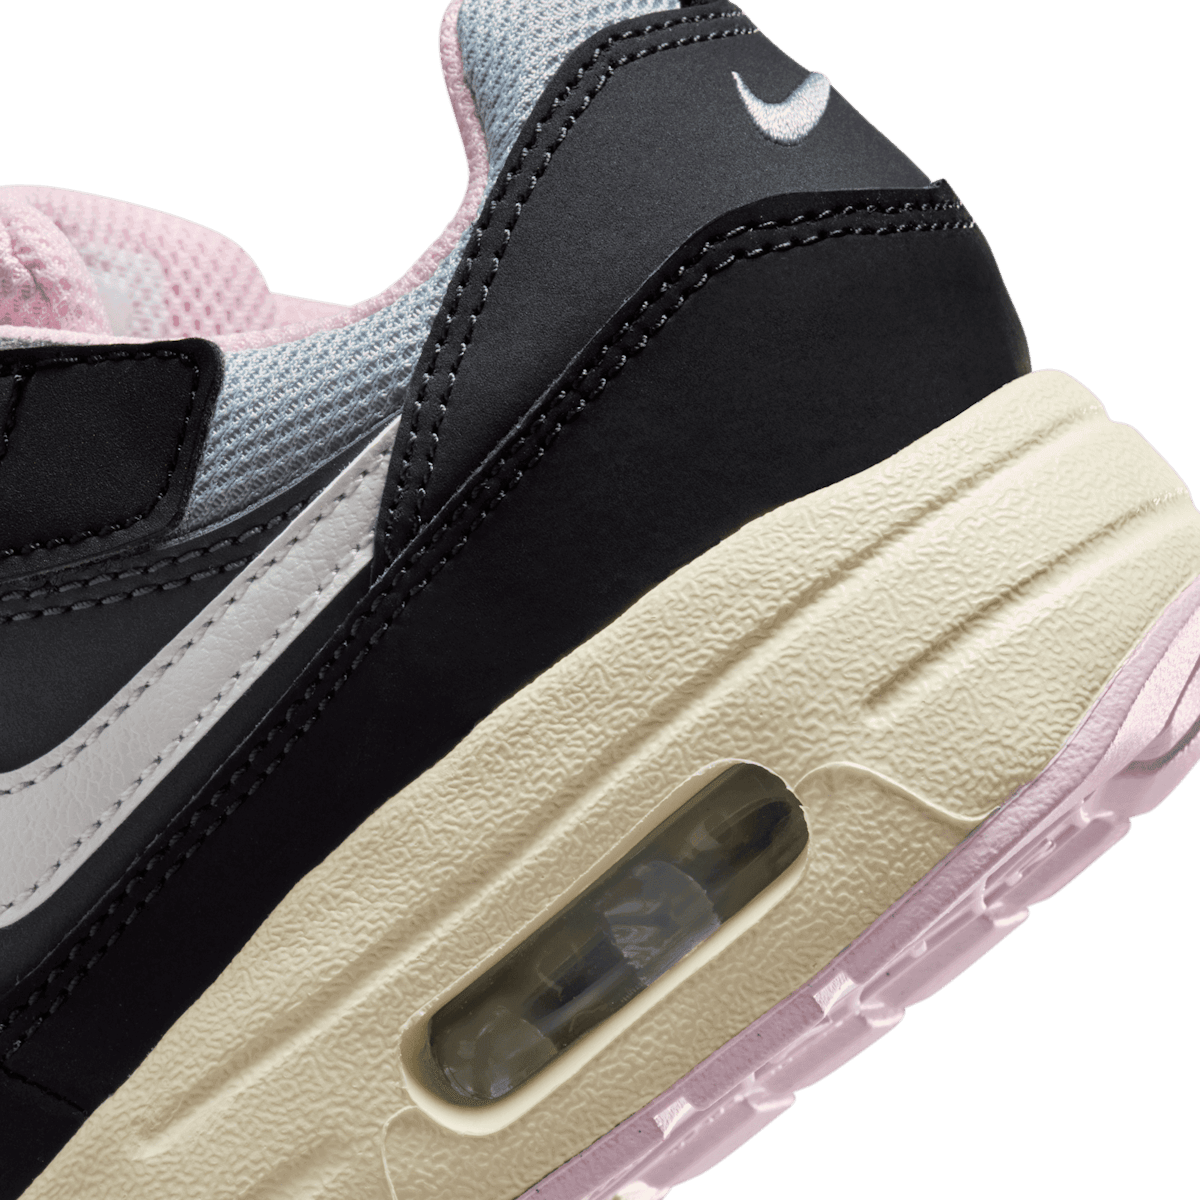 Nike Air Max 1 Black Anthracite Pink Foam (PS) Angle 5